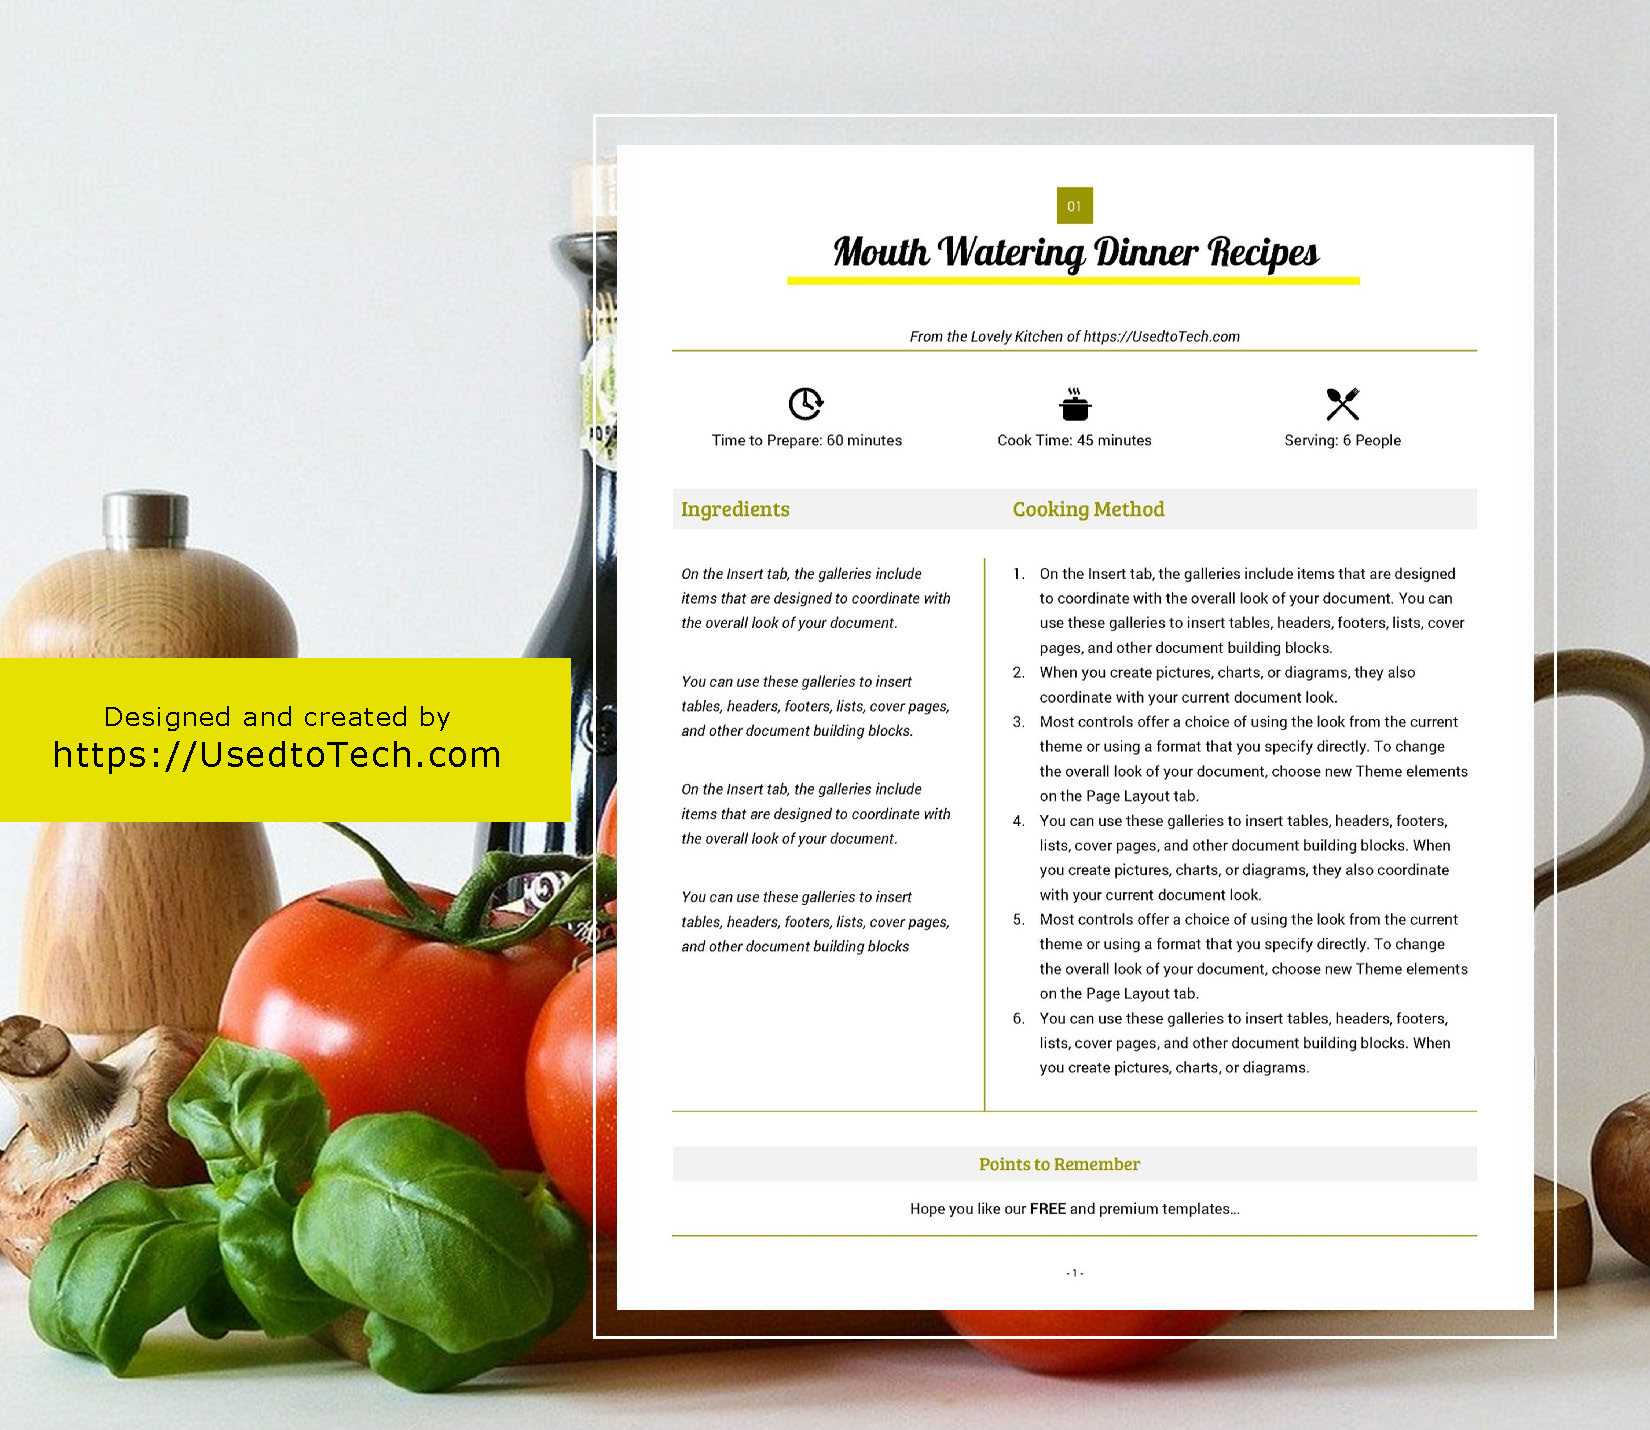 Best Looking Full Page Recipe Card In Microsoft Word – Used Intended For Free Recipe Card Templates For Microsoft Word